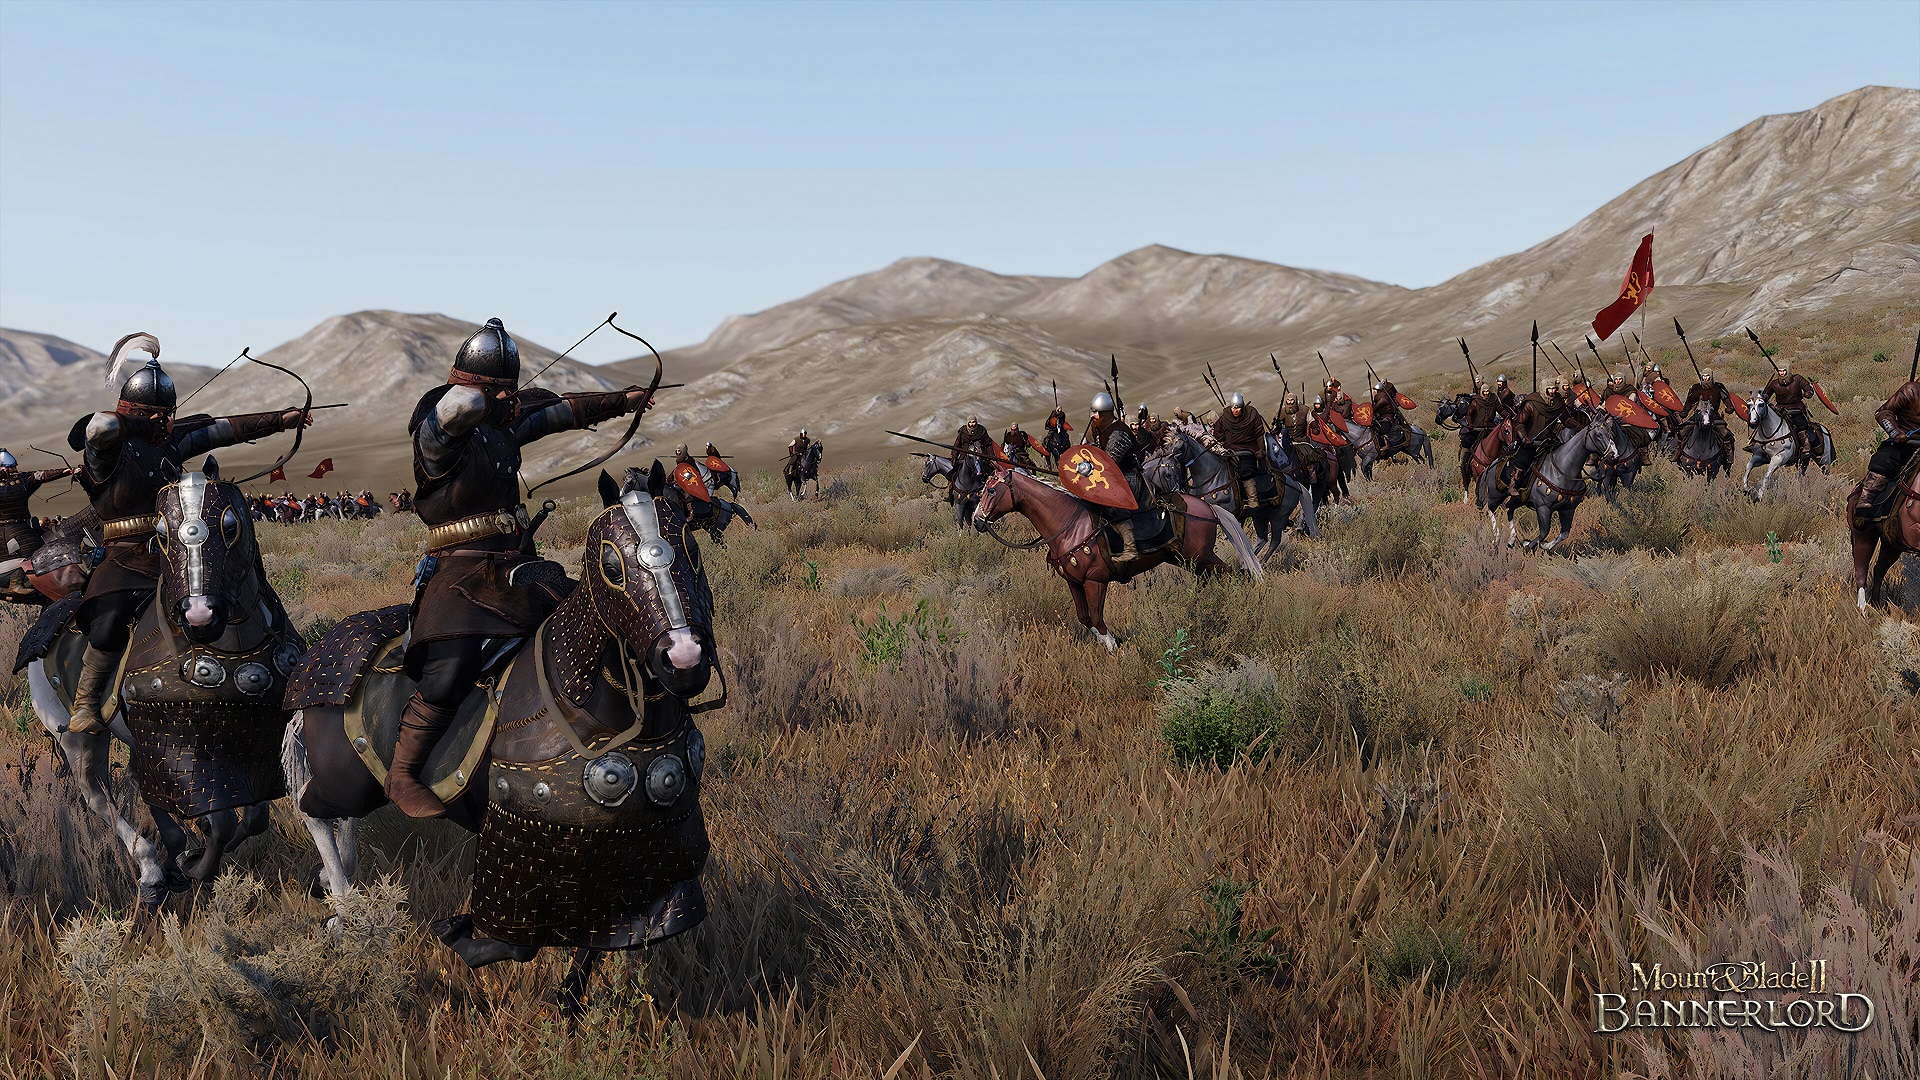 Mount & Blade 2 Bannerlord screenshot showing a battle between mounted archers and knights.